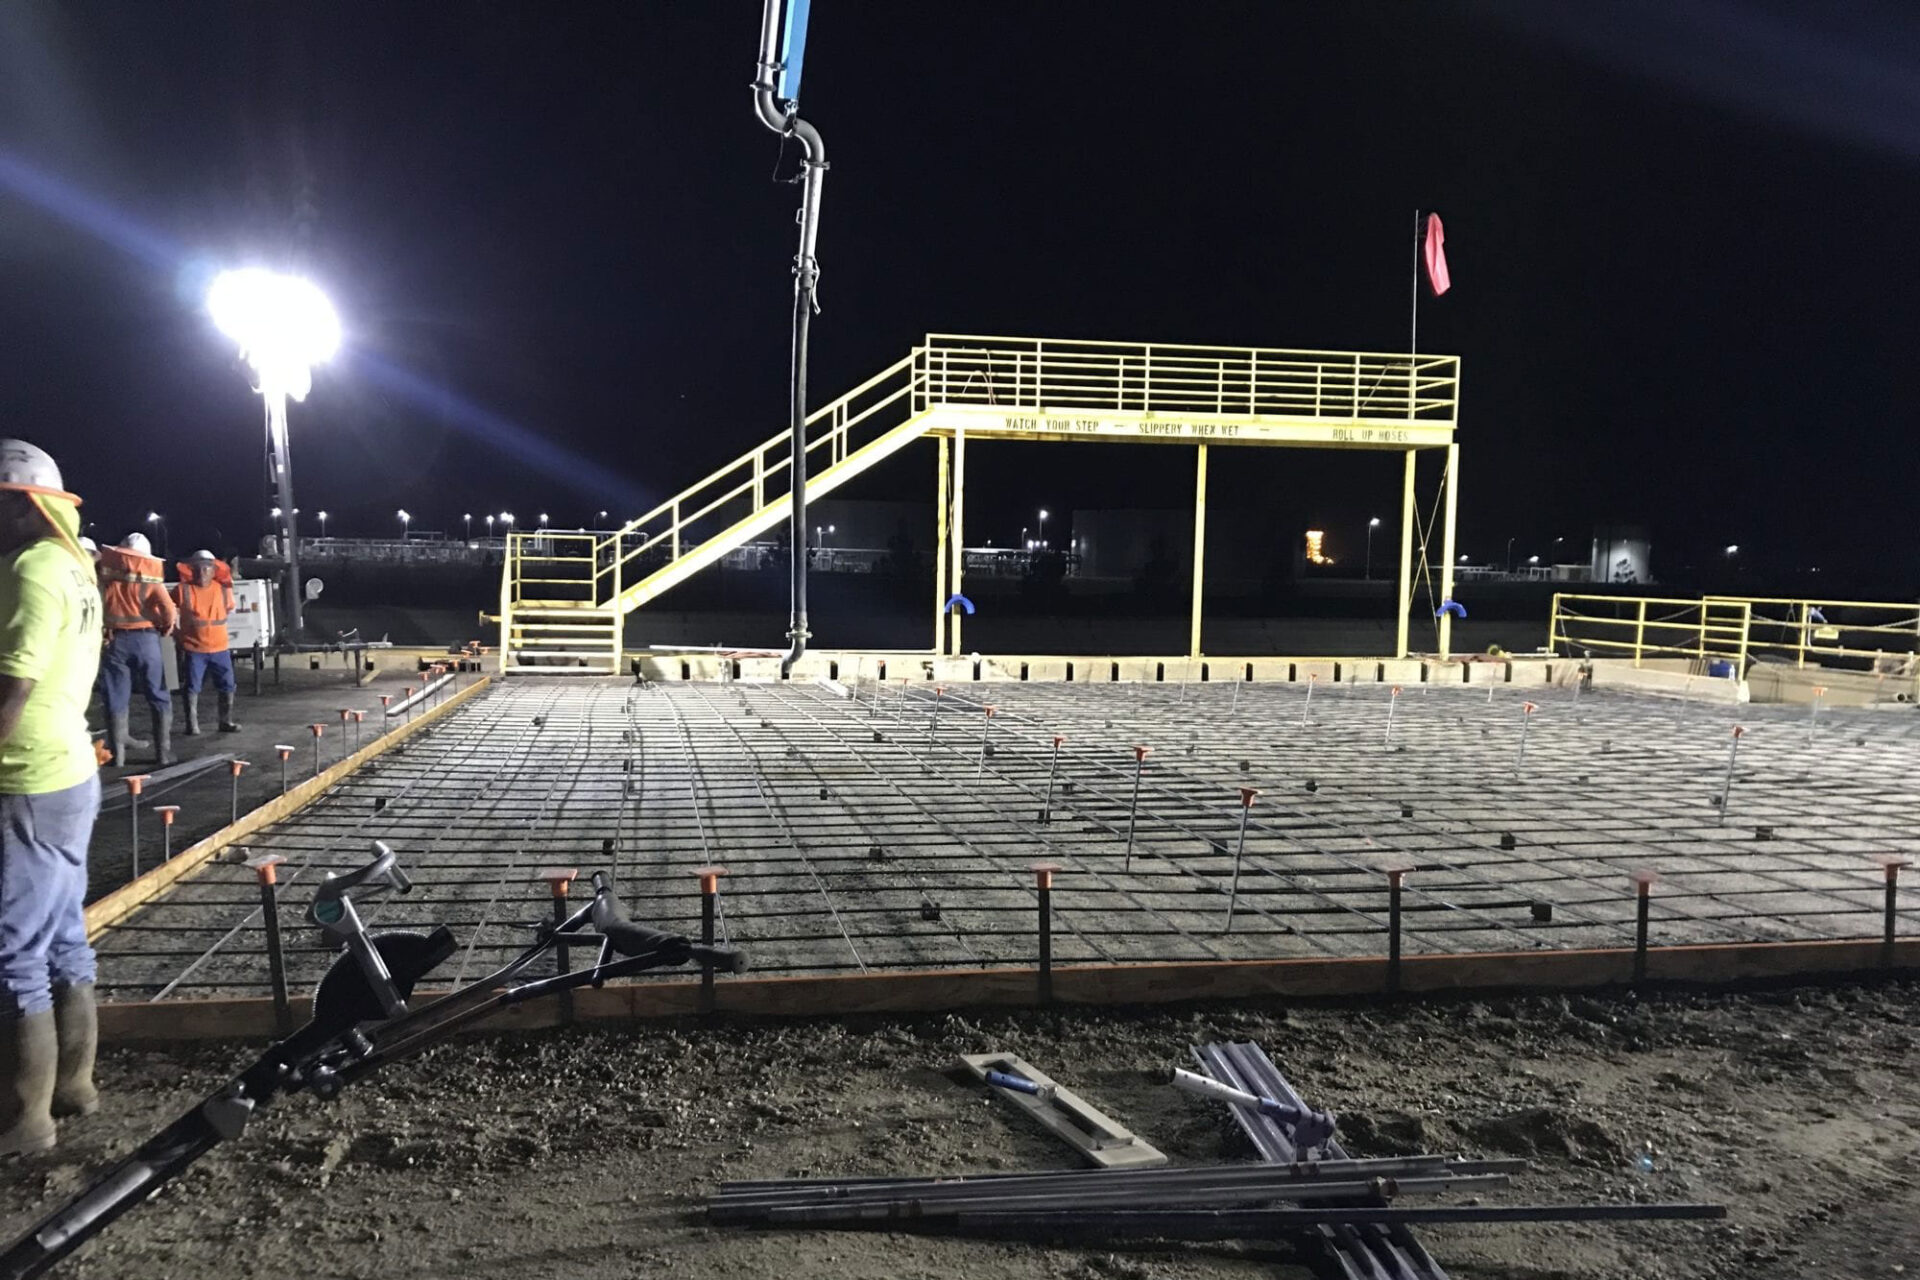 Nighttime construction site with a focus on a newly laid concrete foundation reinforced with a grid of steel rebar. Workers in high-visibility clothing and hard hats are present, with a portable light tower illuminating the area. In the background, construction equipment and industrial structures are faintly visible under the dark sky.